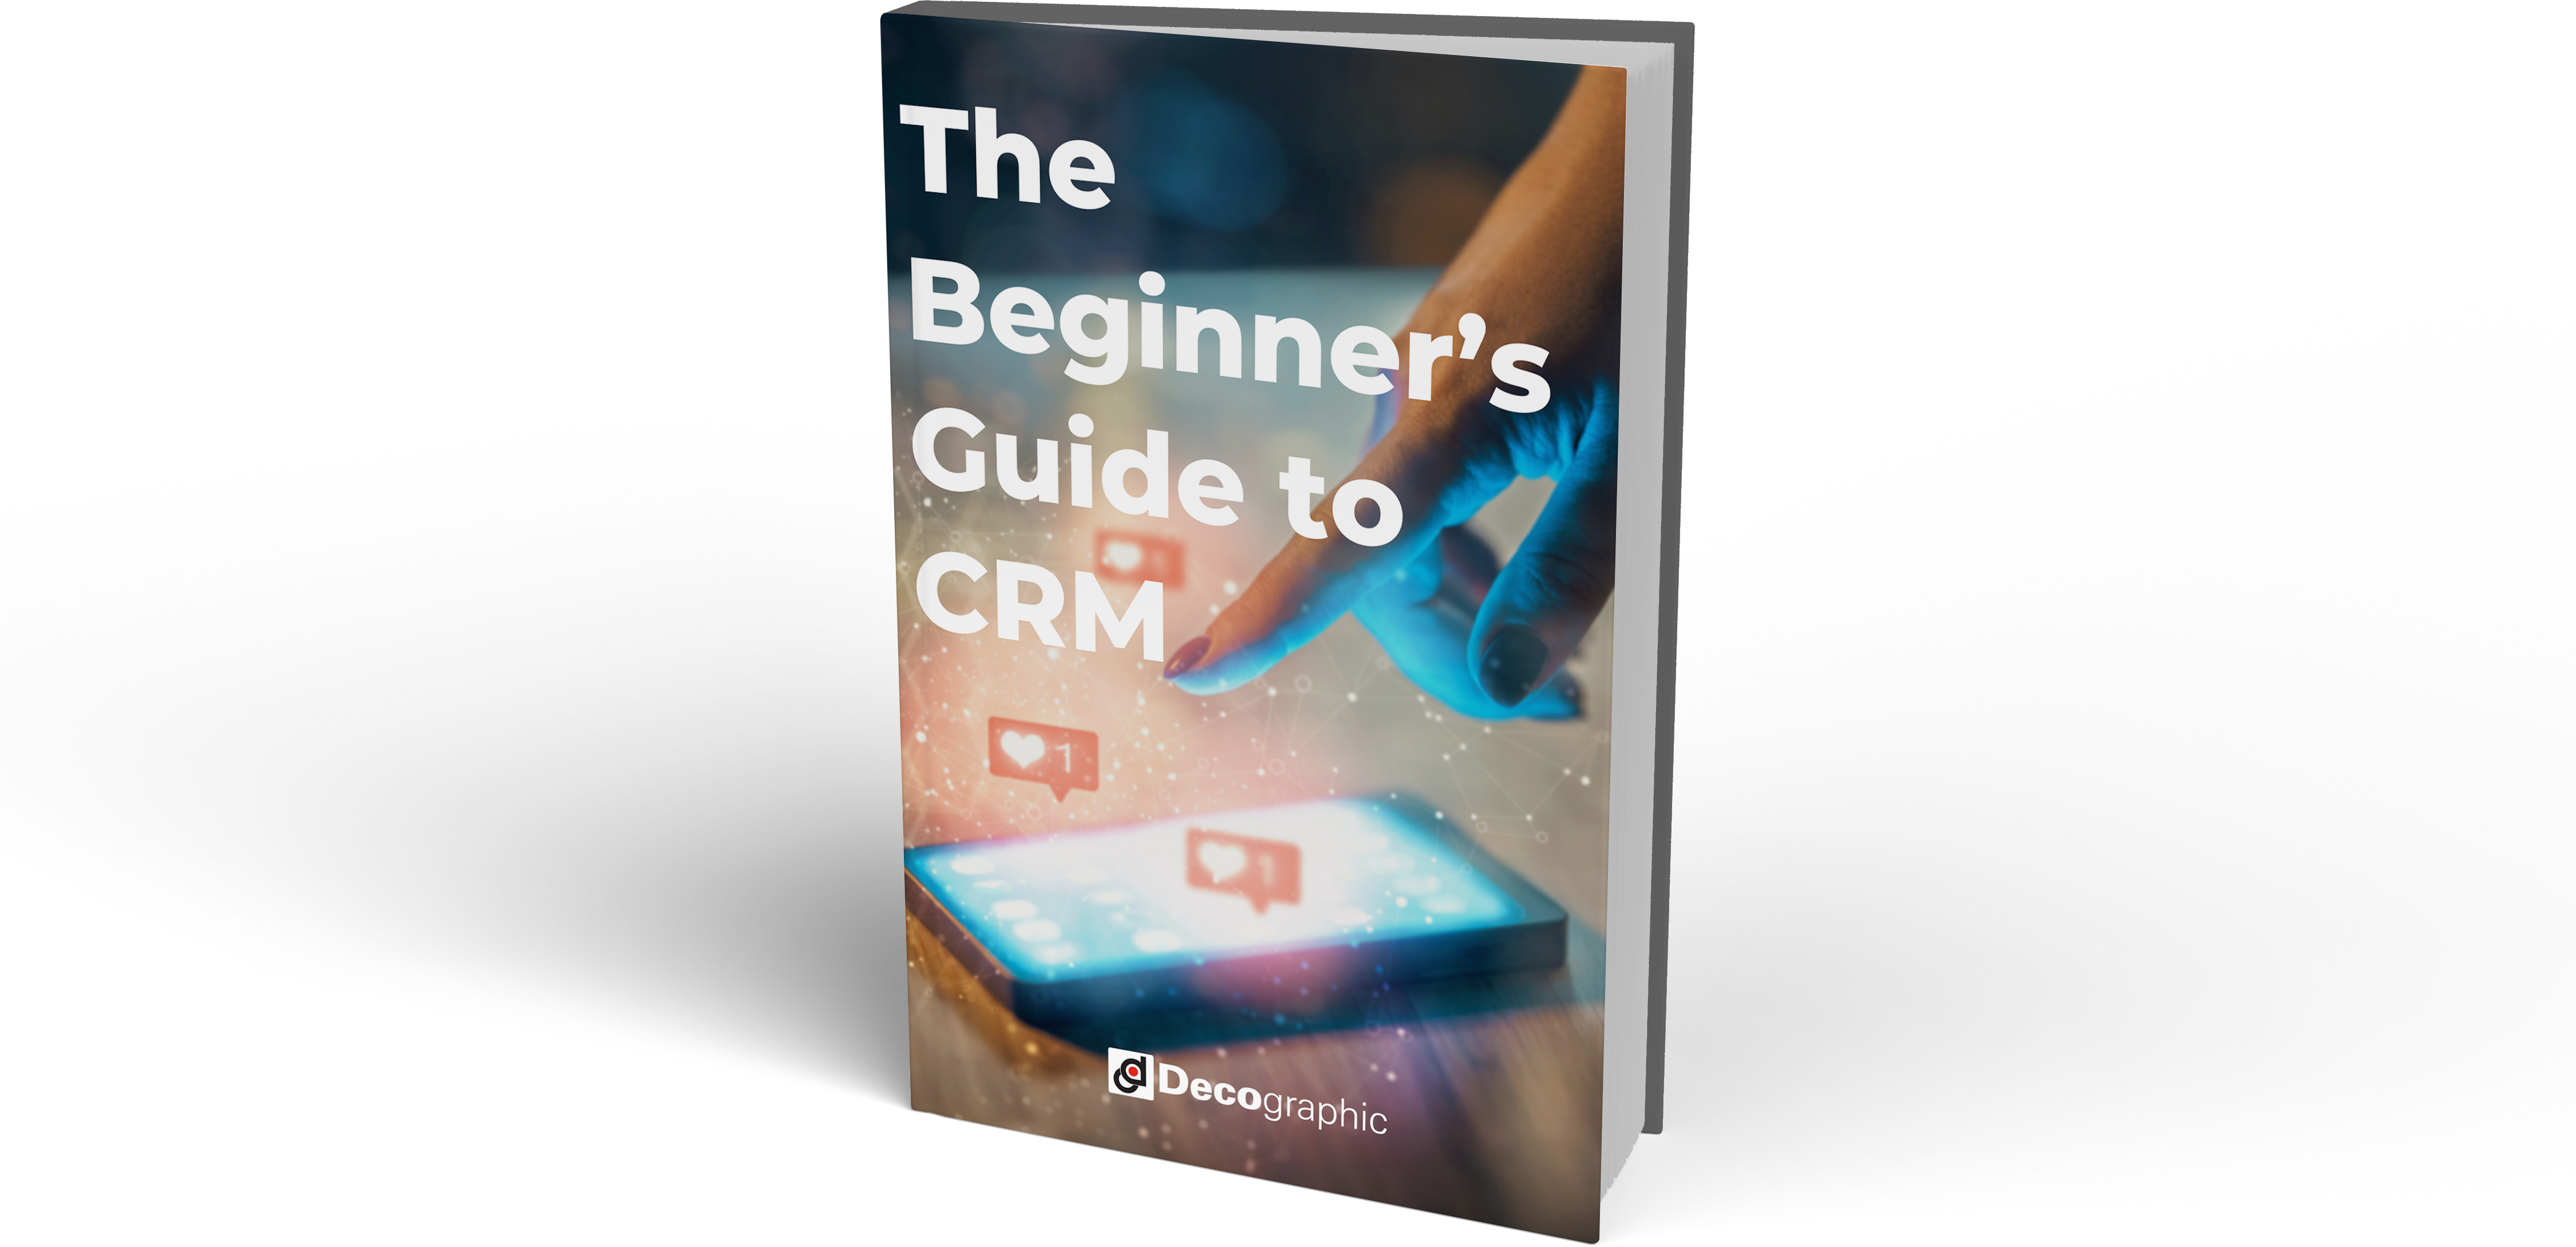 The Beginners Guide to CRM (2)